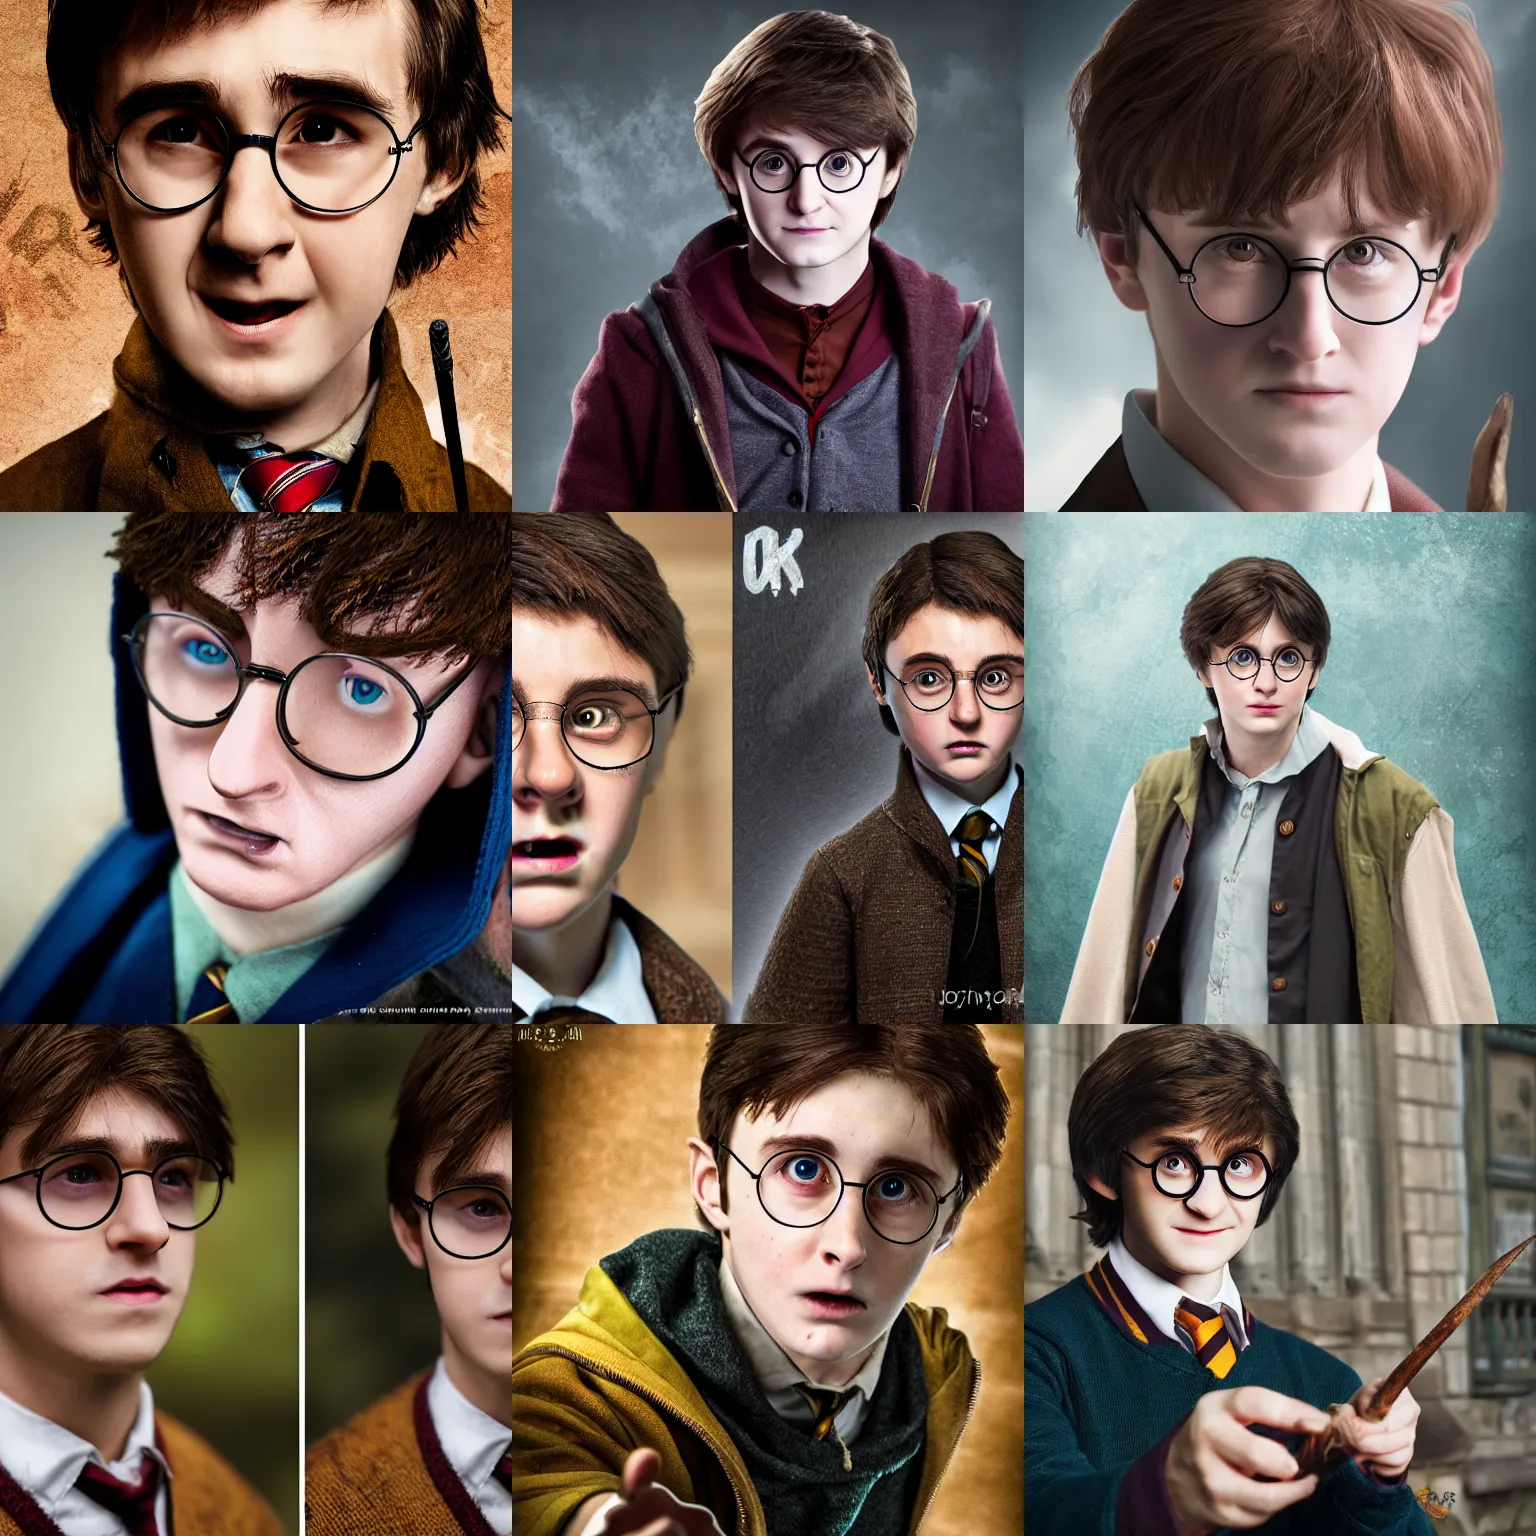 Prompt: Johnny sinns as Harry Potter, photorealistic, detailed, high quality, 8K, DSLR photo, fully detailed